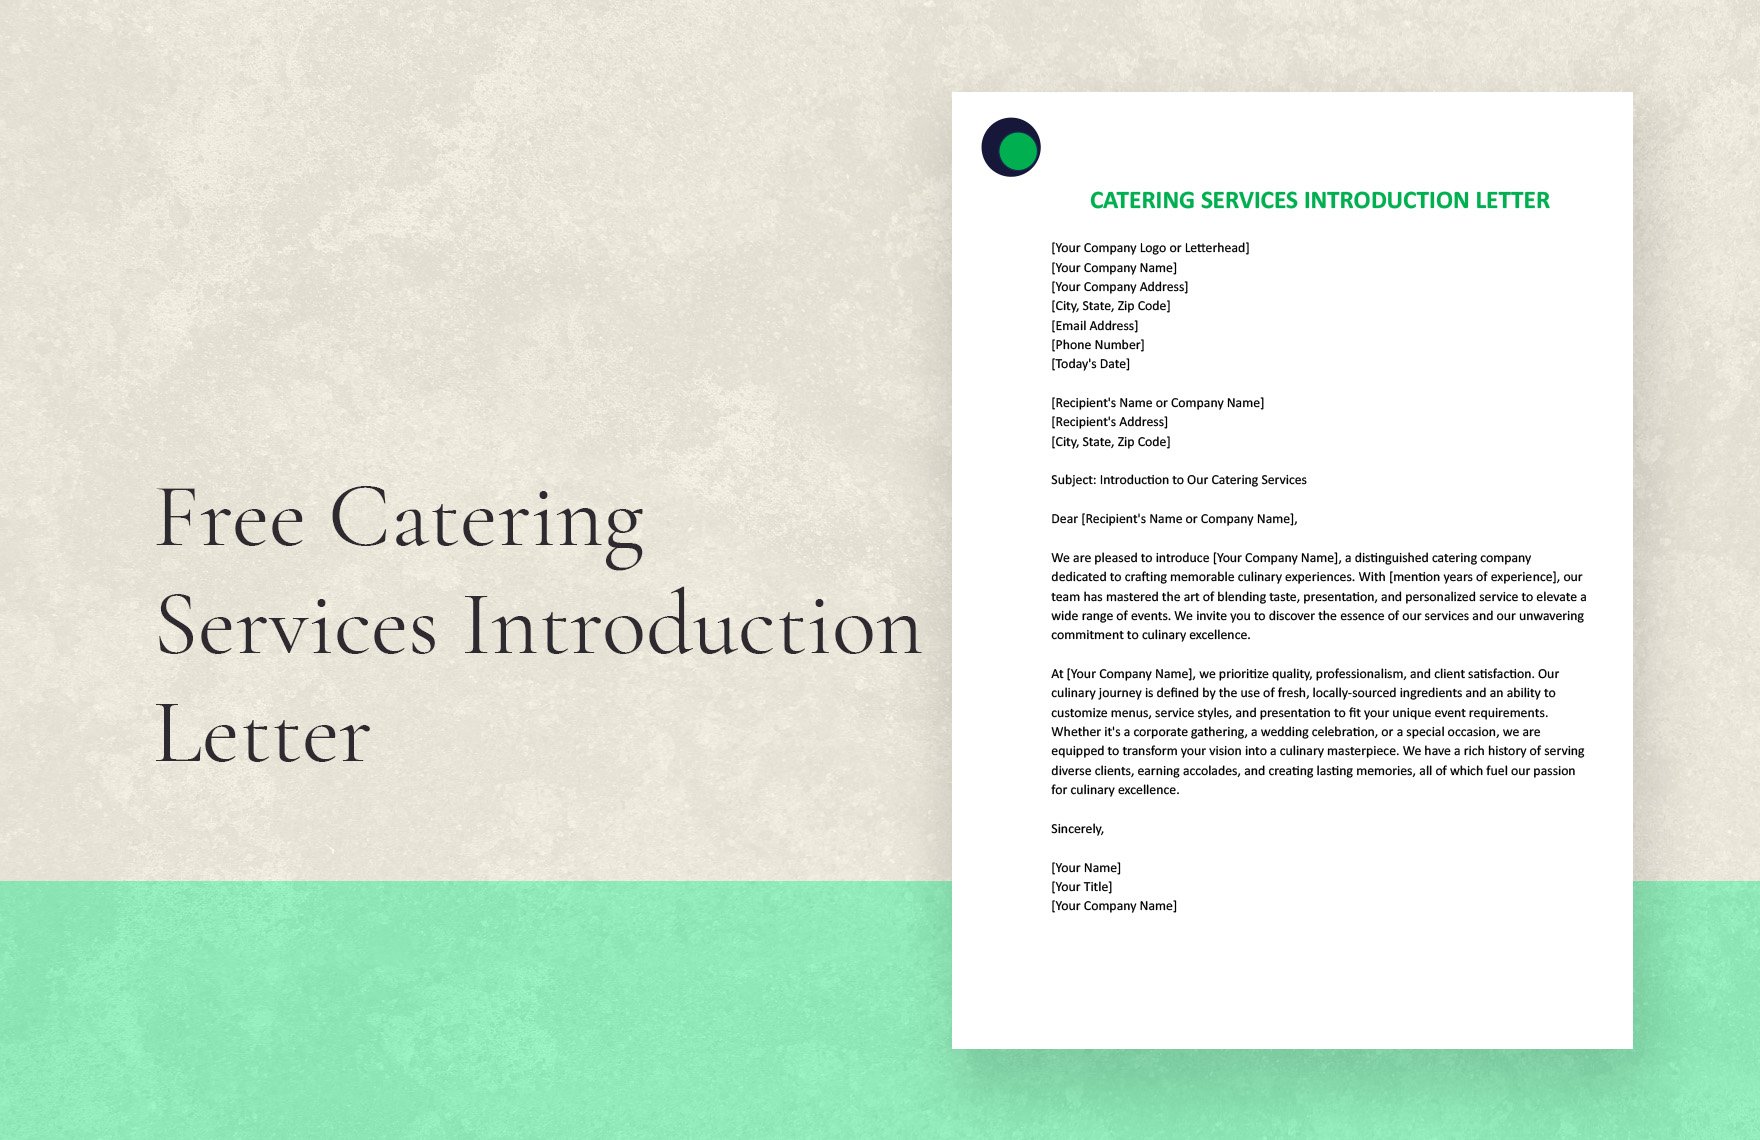 Free Catering Services Introduction Letter